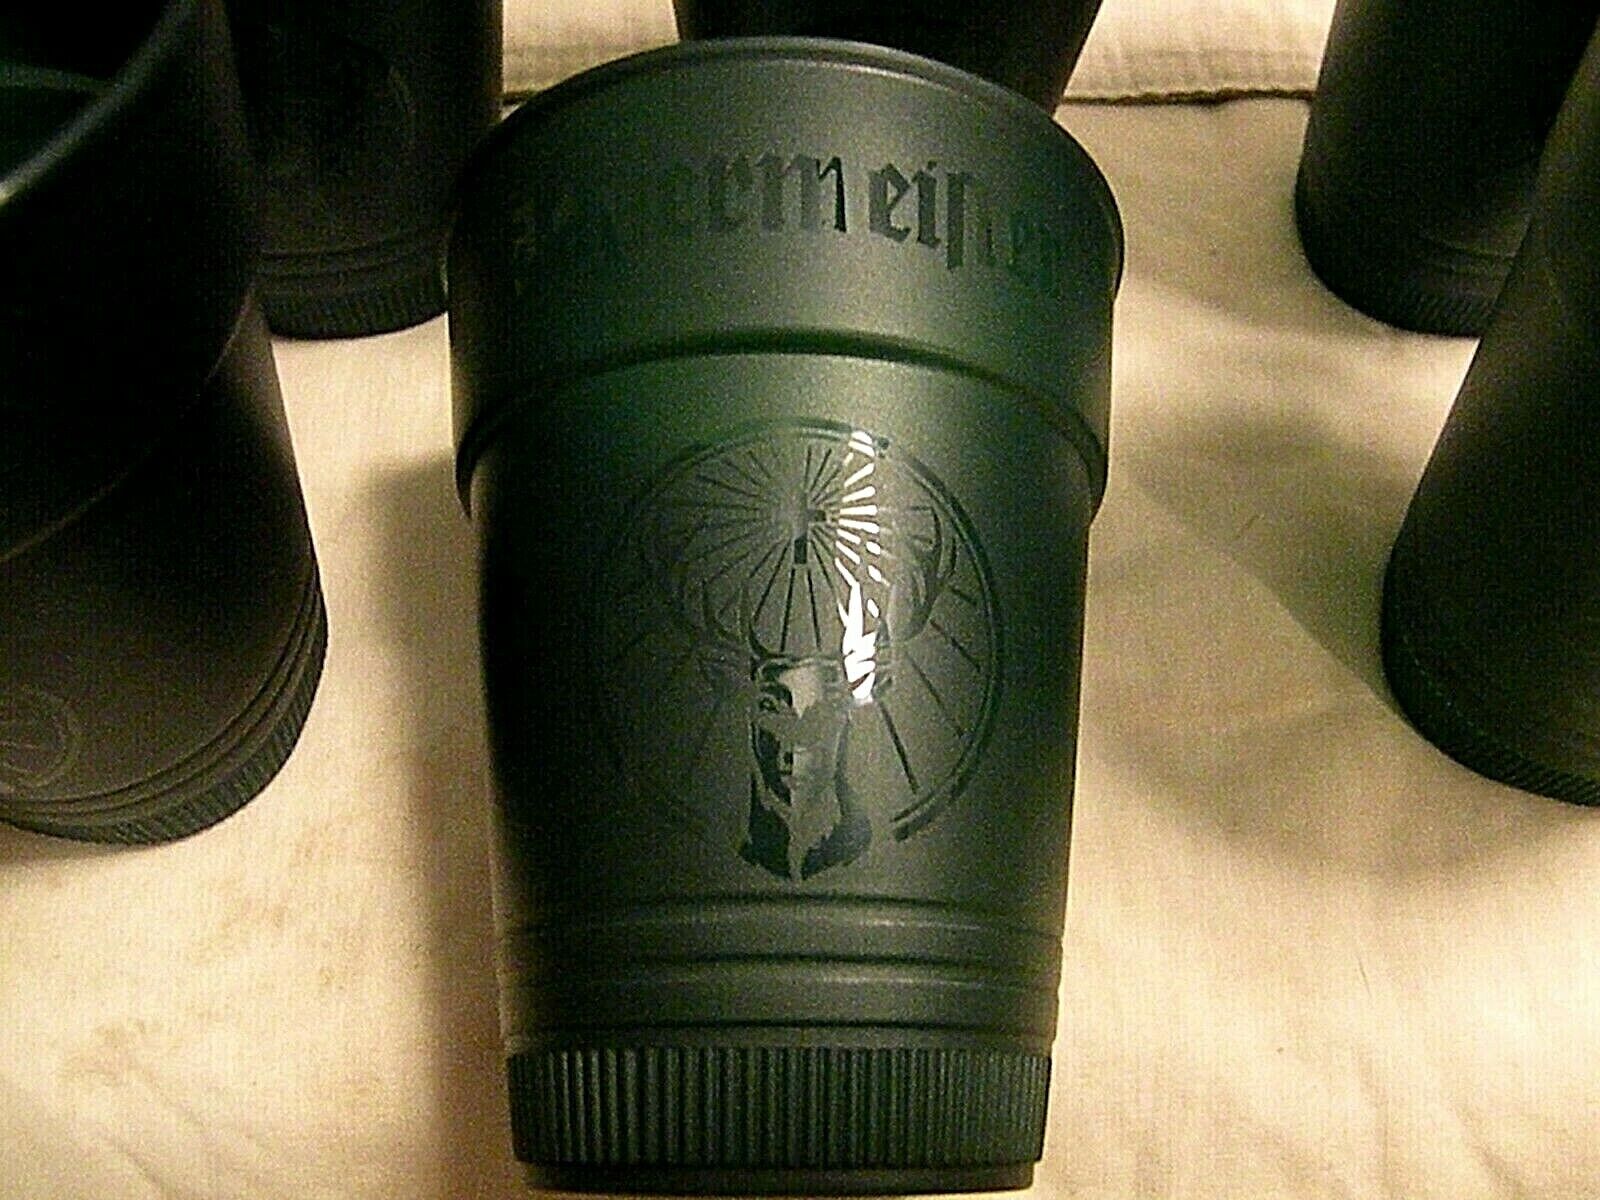 NEW 6 PC. Set of Jagermeister 12 oz. Cups w/ Jager Stag Logo    